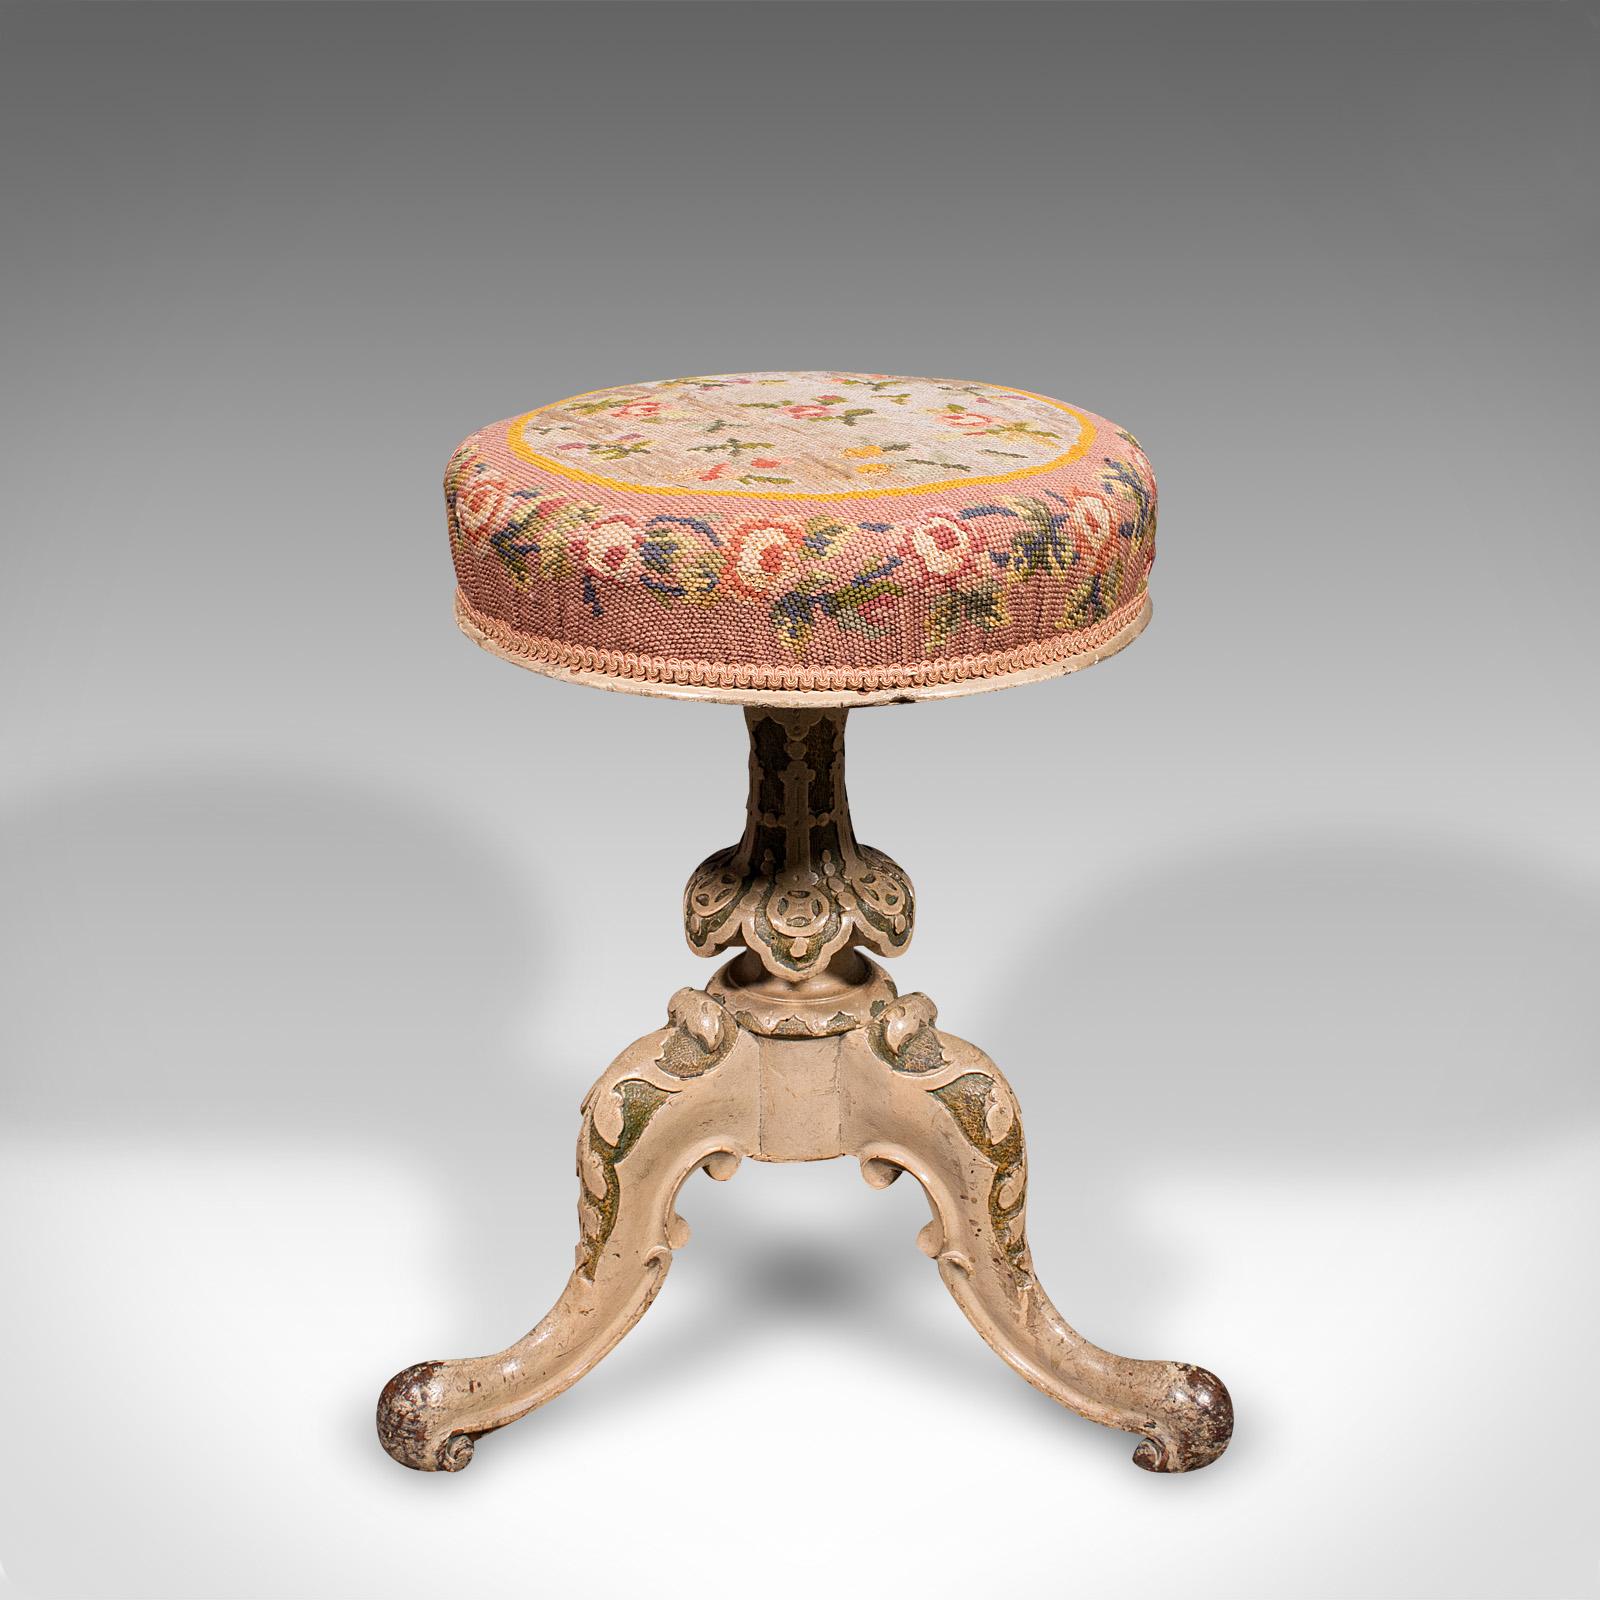 This is an antique piano stool. An English, painted music stool with riser, dating to the early Victorian period, circa 1850.

Appealing Victorian music stool with adjustable height
Displays a desirable aged patina and in good order
Painted mahogany